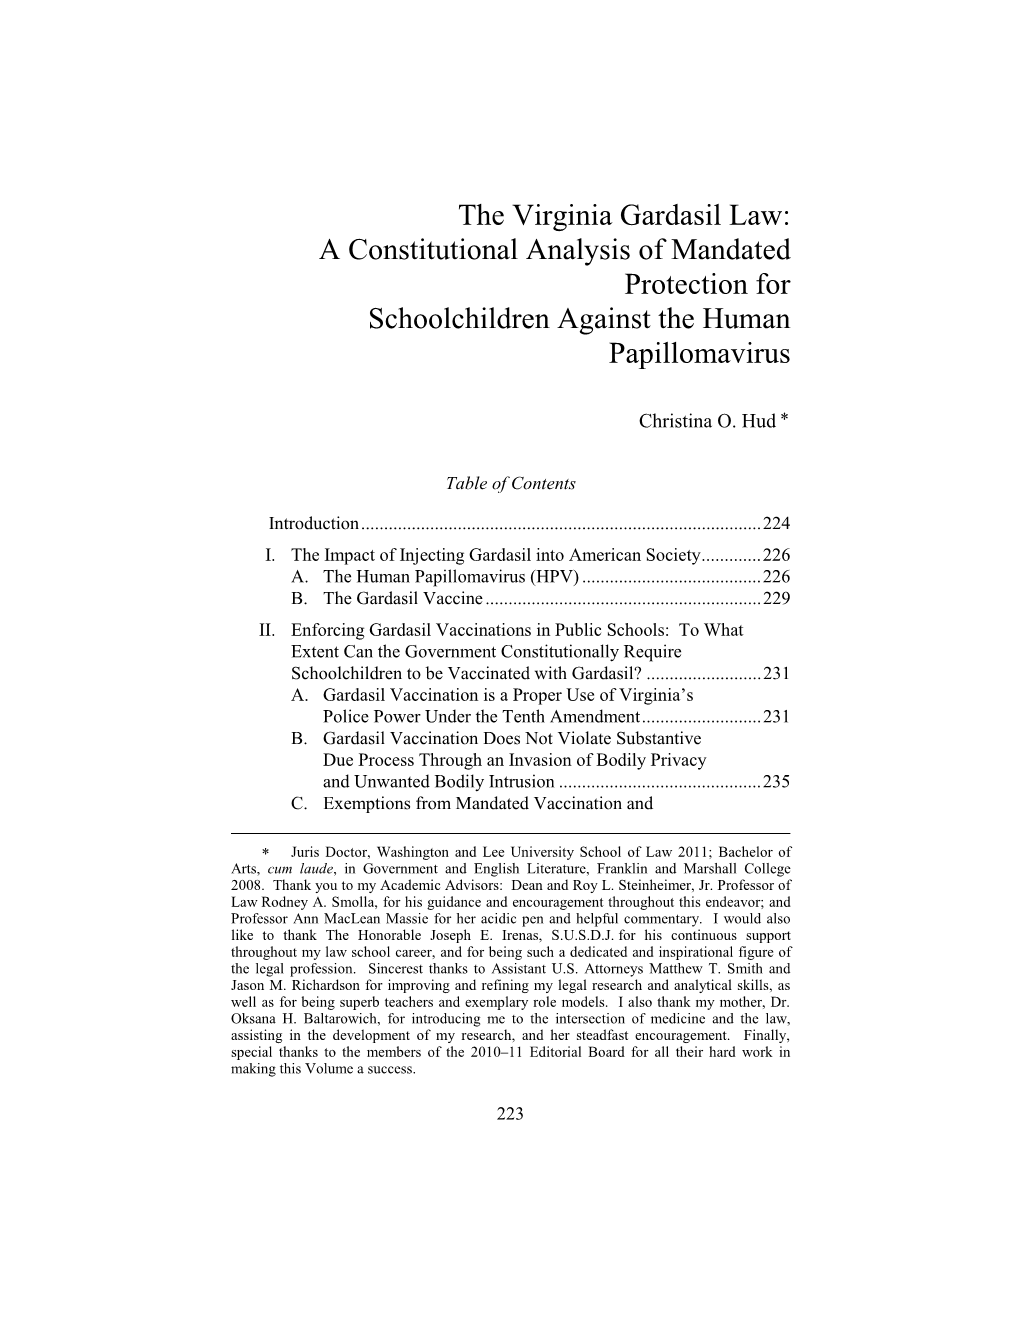 The Virginia Gardasil Law: a Constitutional Analysis of Mandated Protection for Schoolchildren Against the Human Papillomavirus